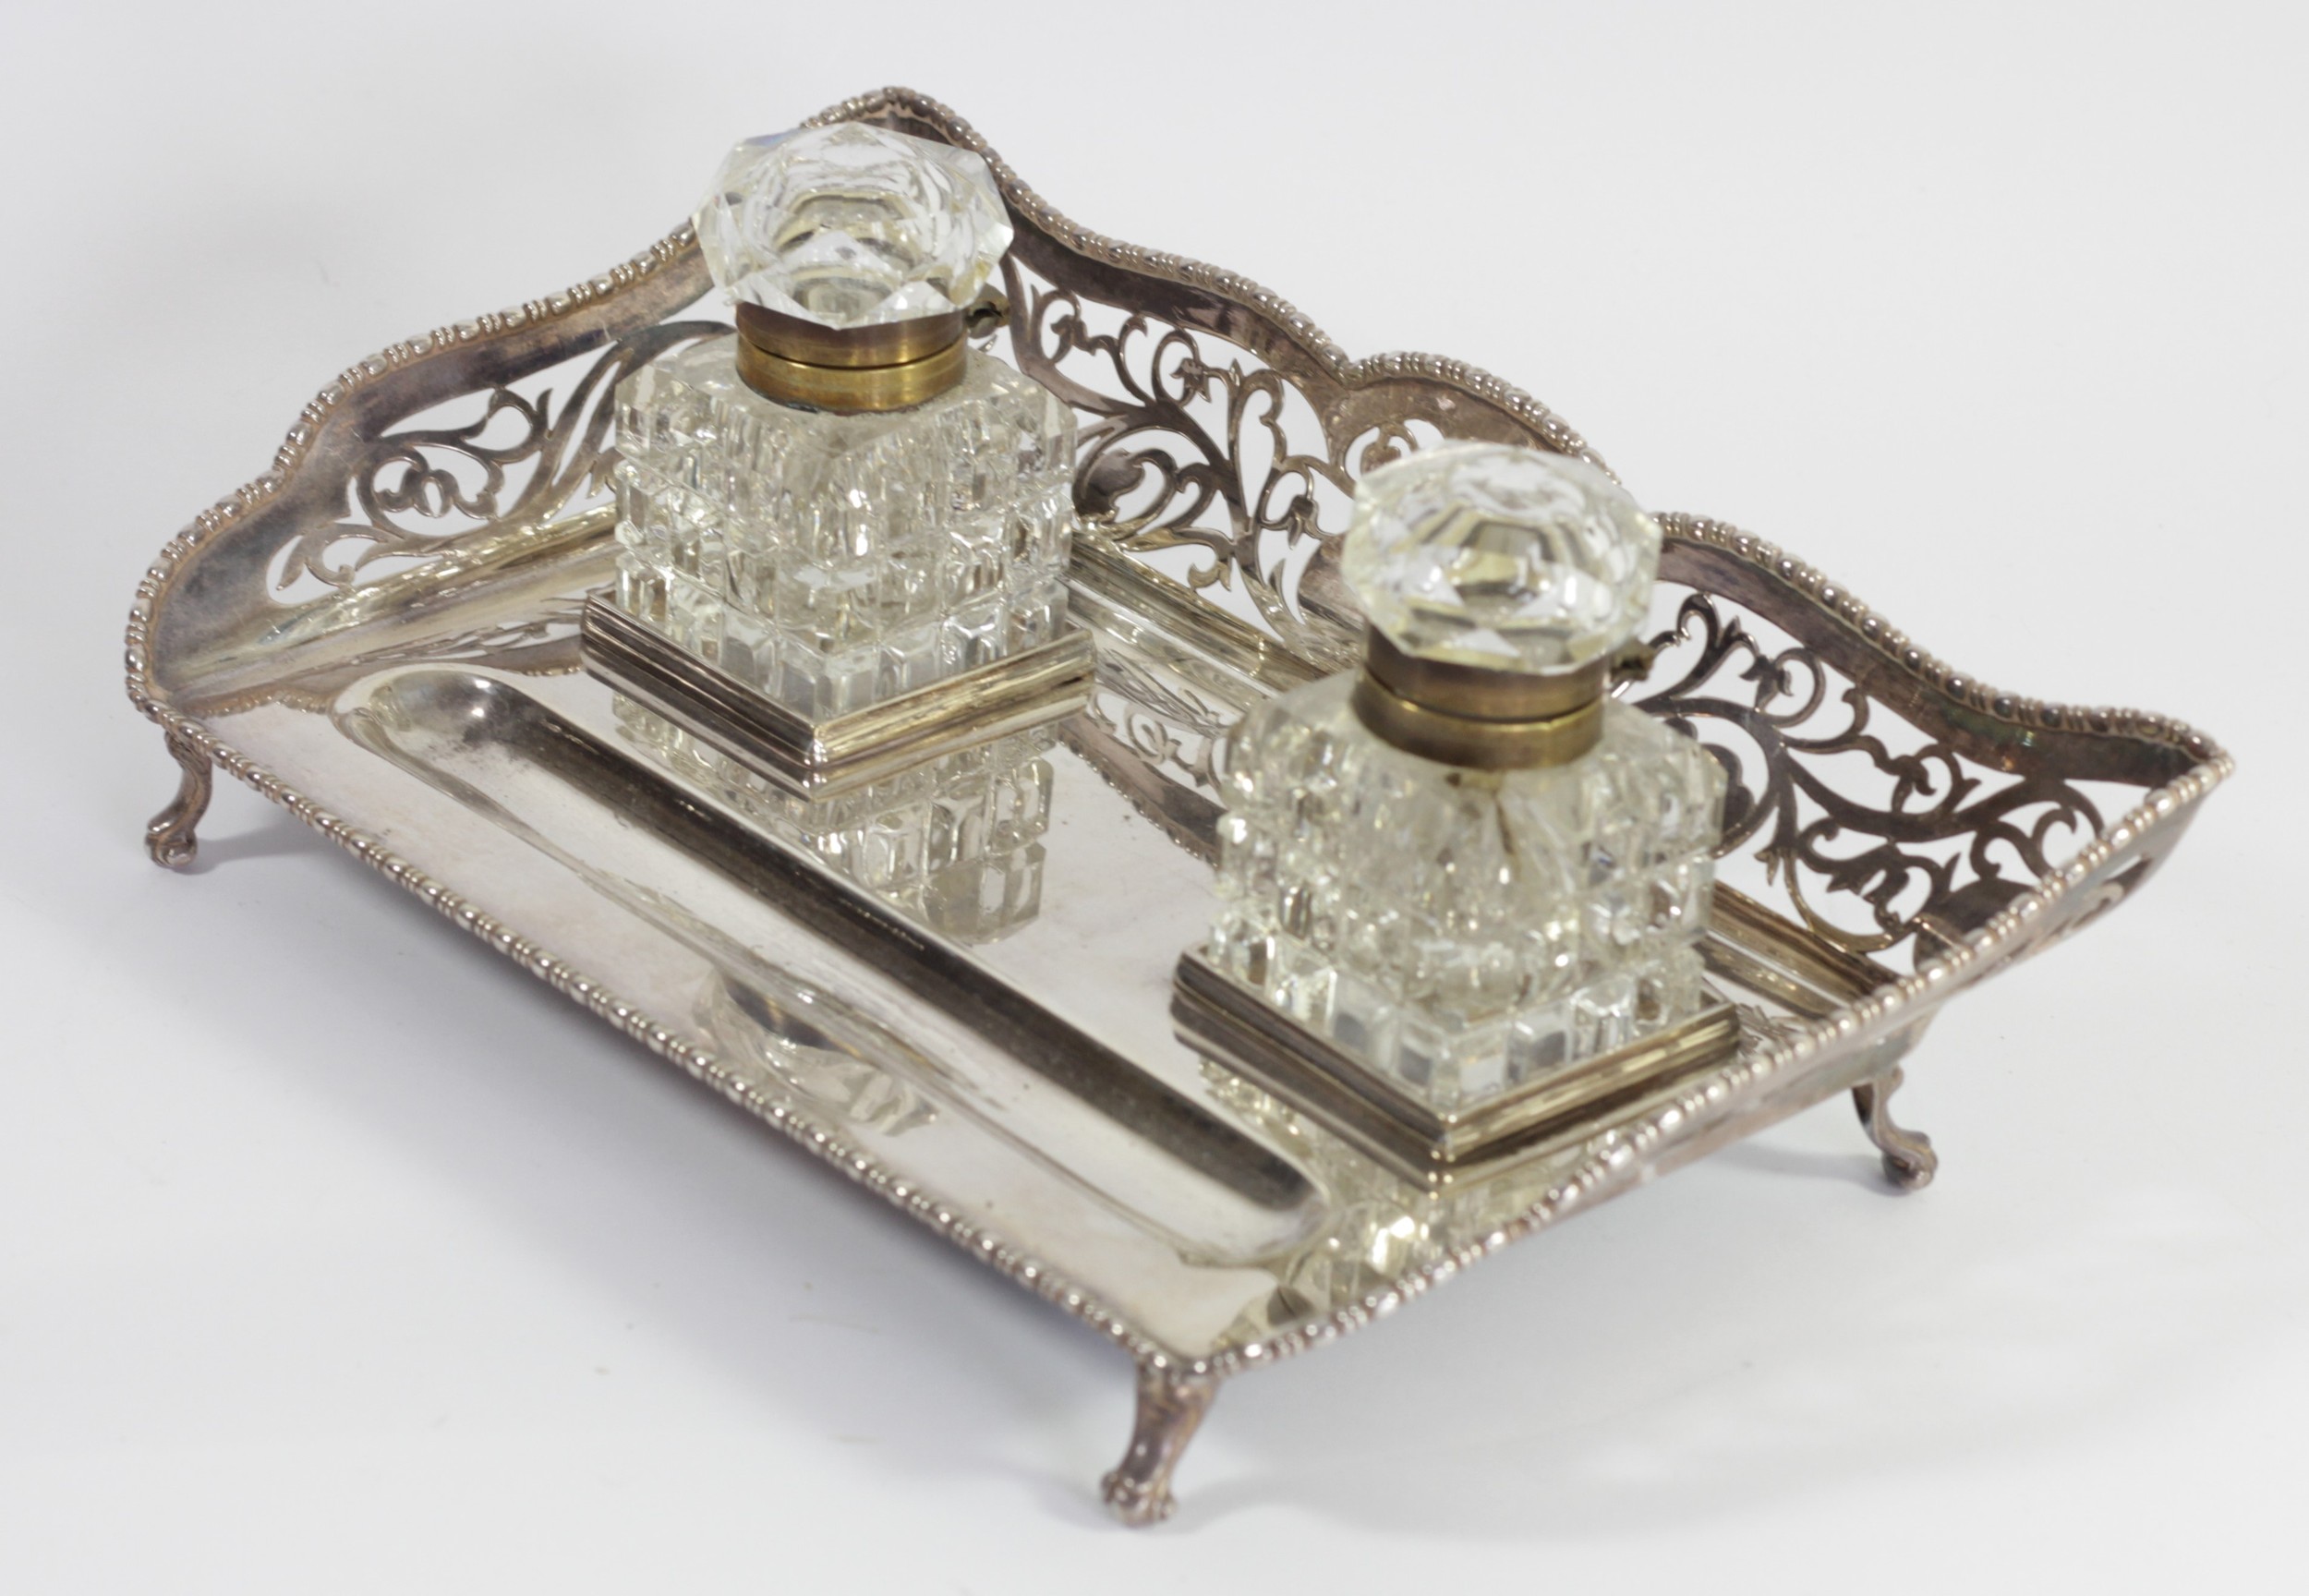 An electroplated two bottle desk stand, 3/4 pierced gallery with gadrooned border, cut glass brass - Image 2 of 4